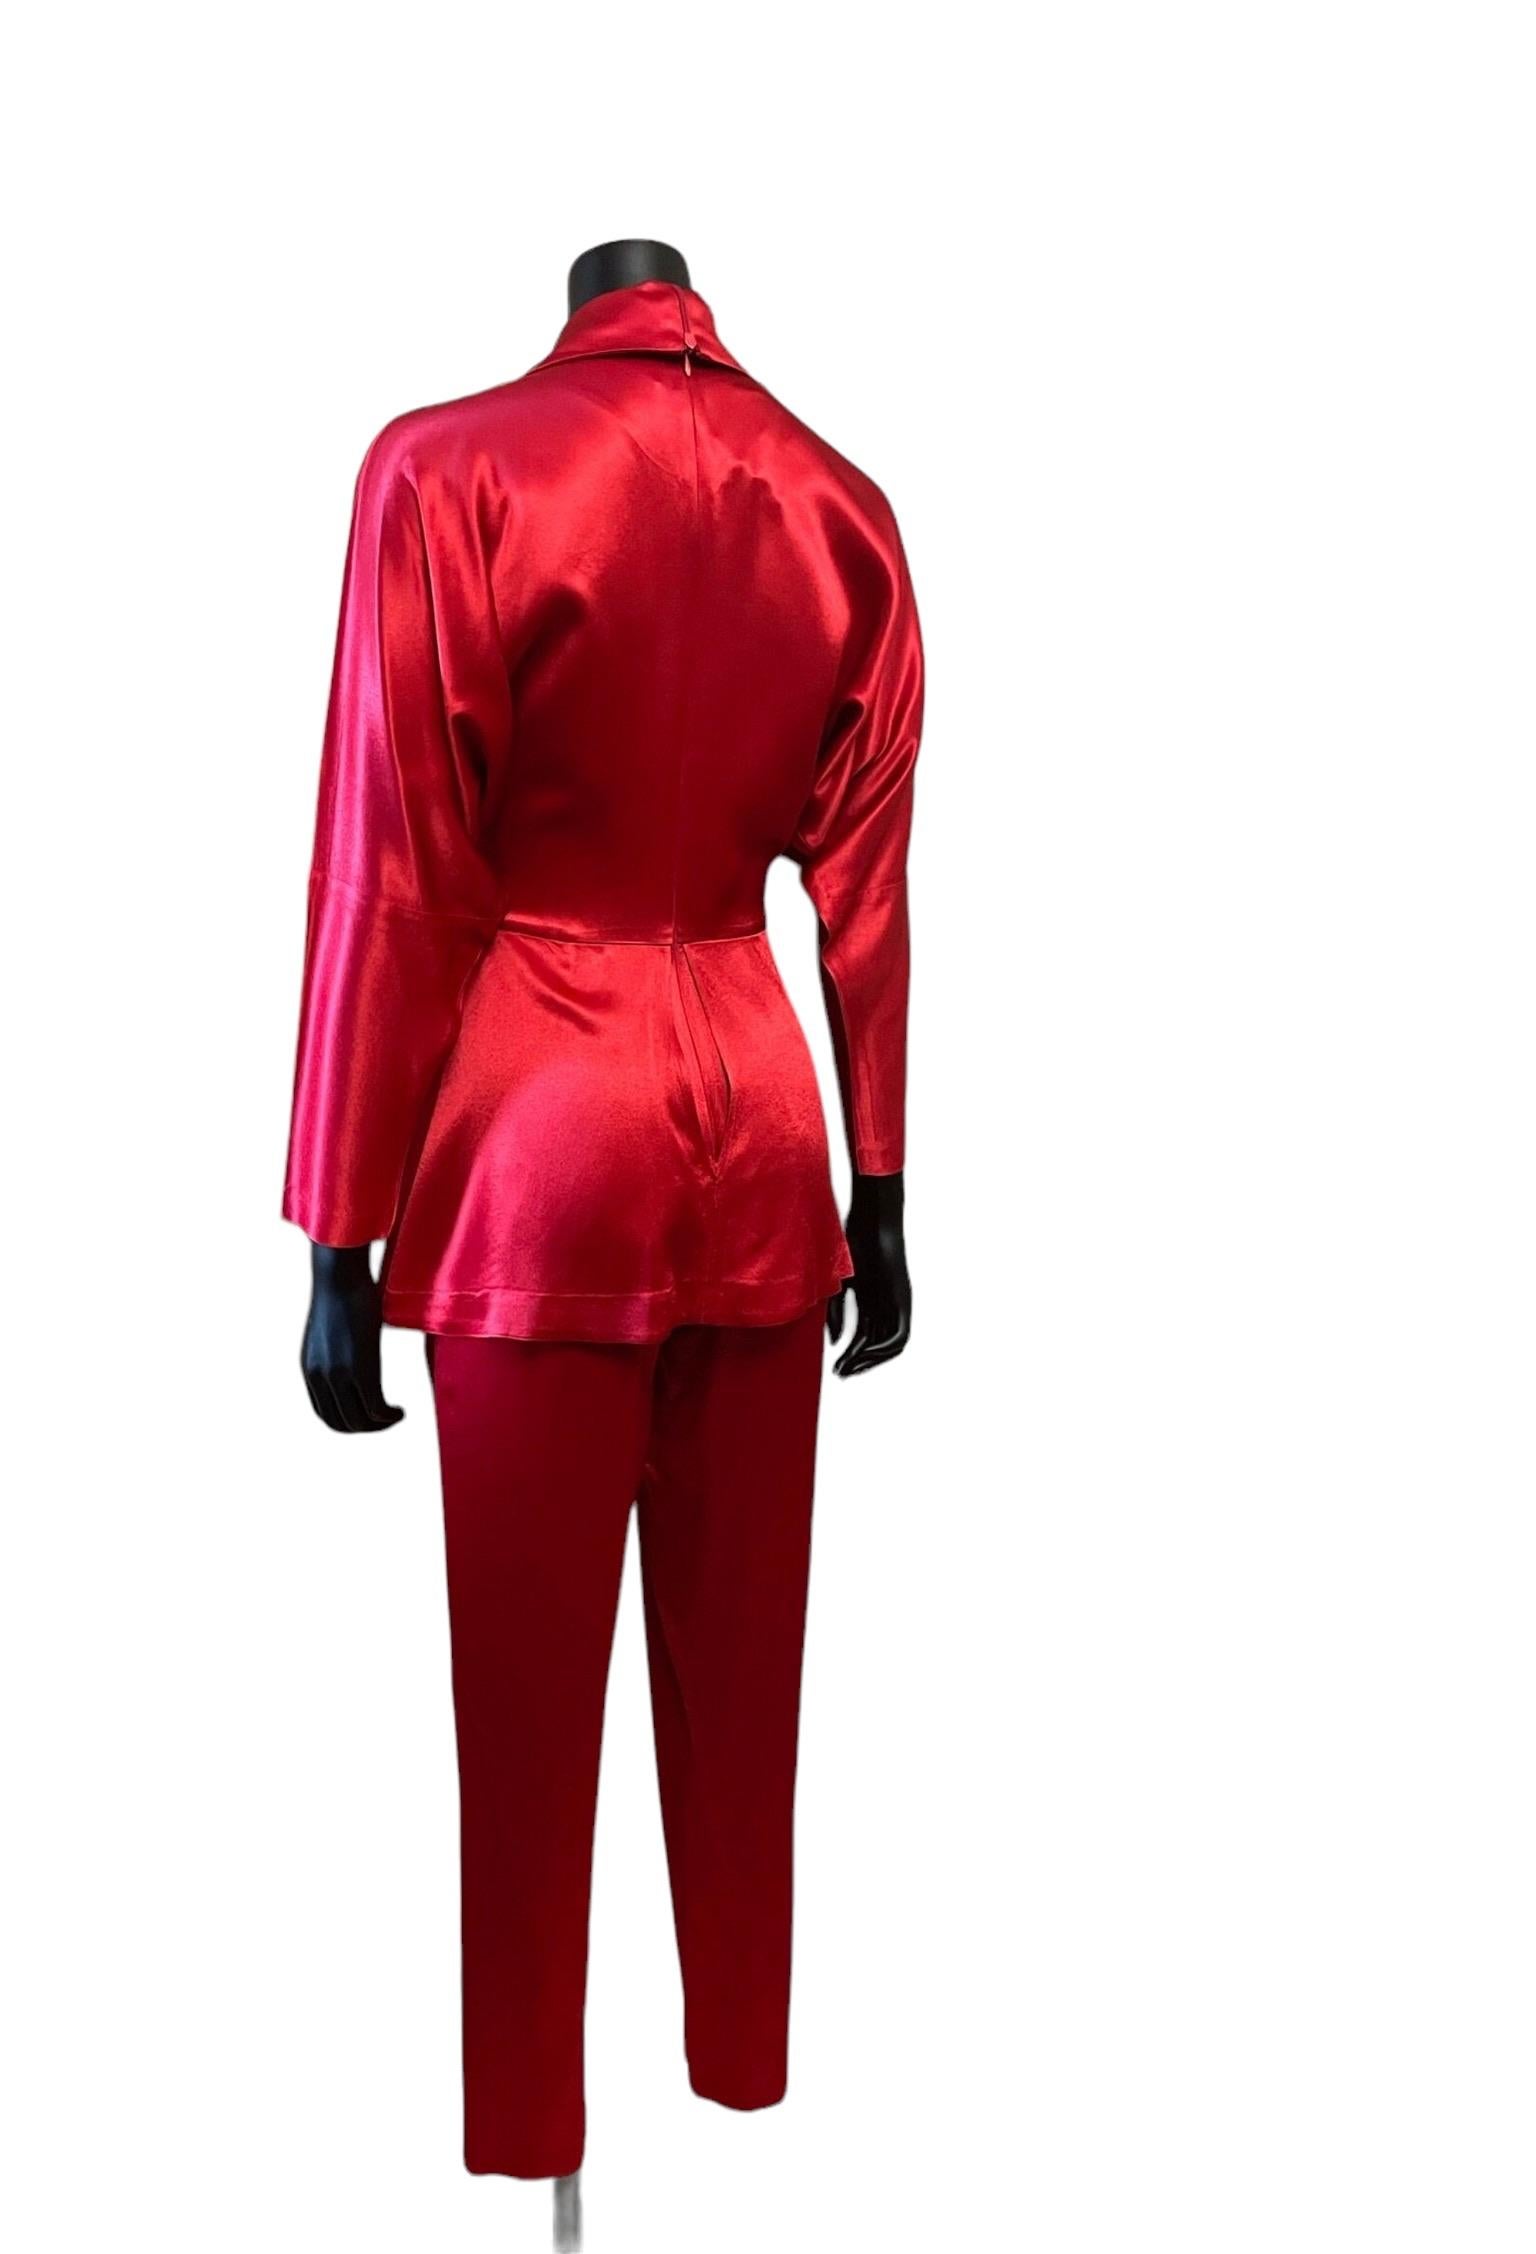 Norma Kamali Lipstick Red Jumpsuit, Circa 1980s For Sale 4